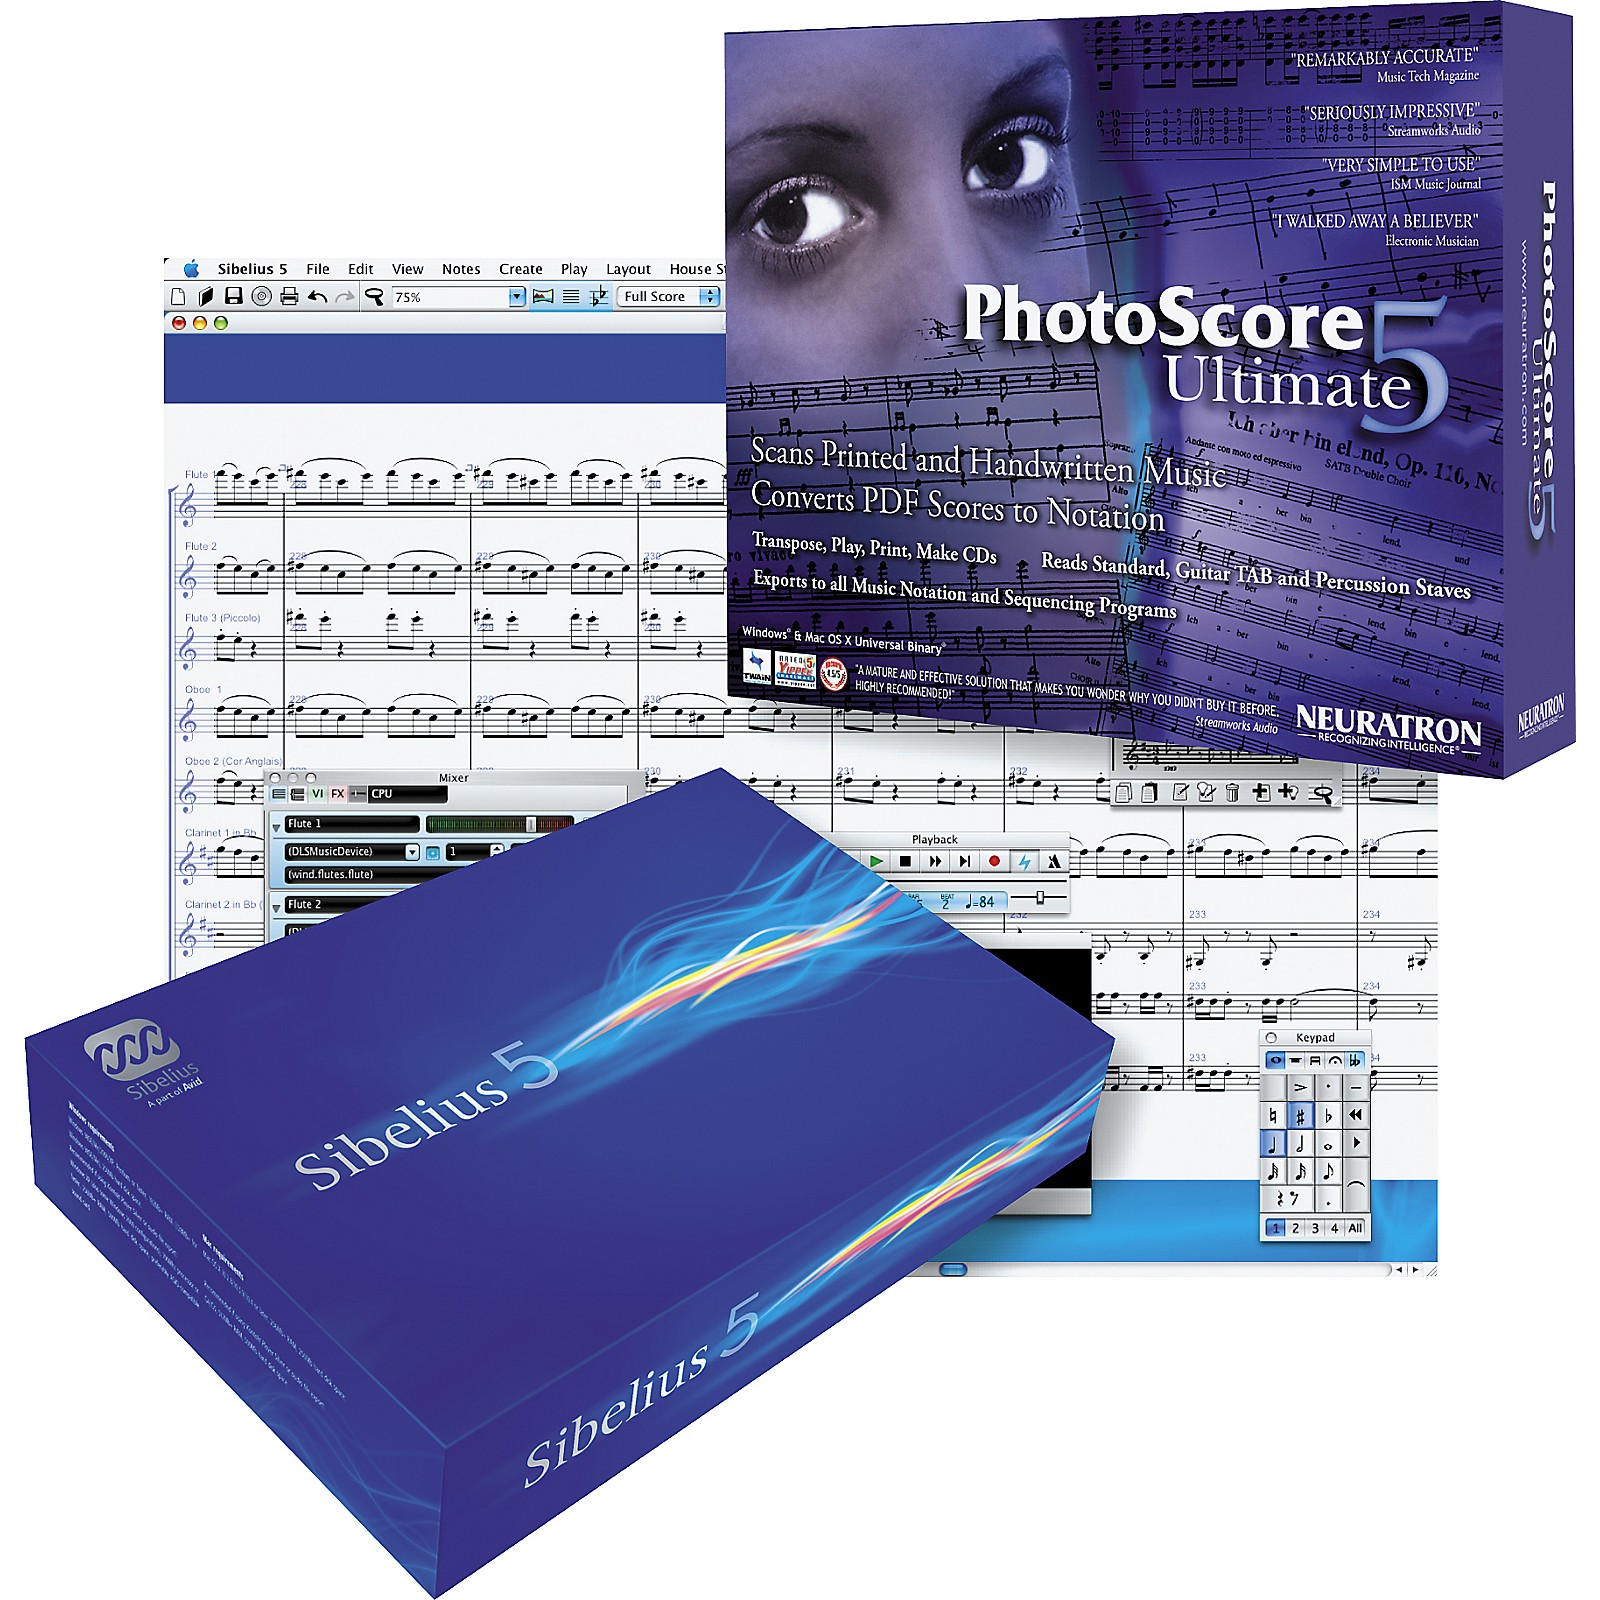 photoscore ultimate review